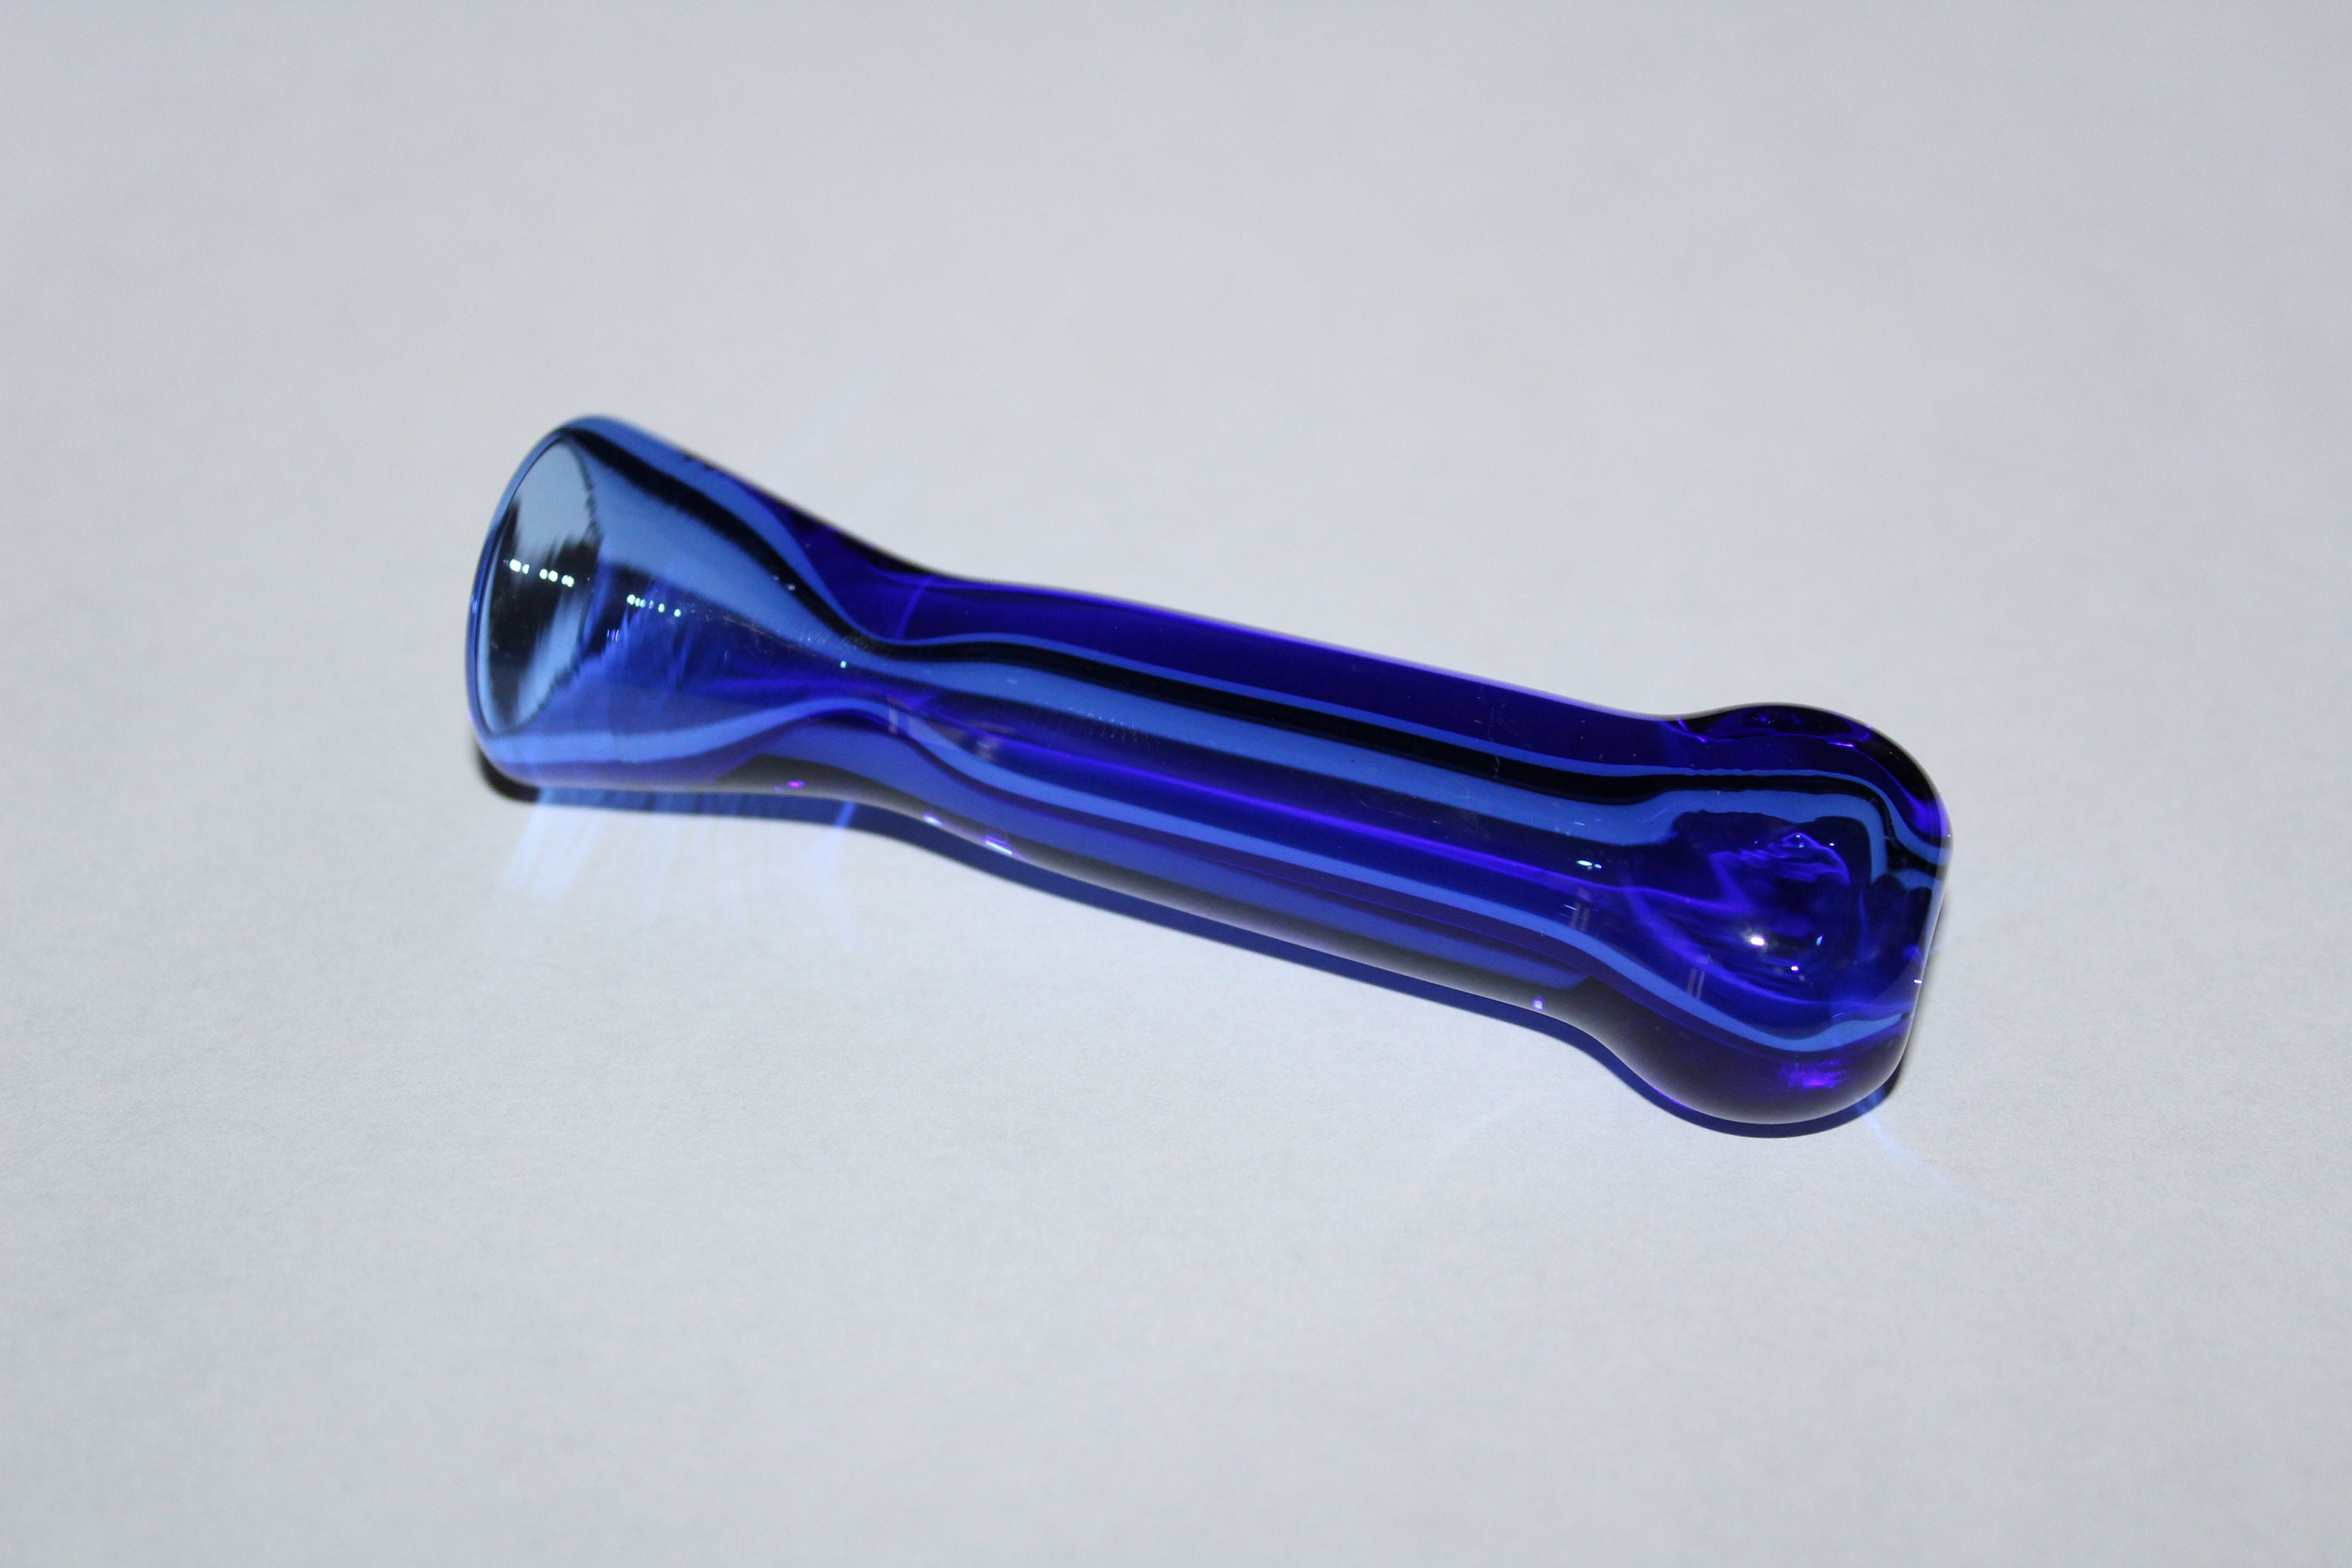 BASIC ELEMENTS Chameleon Glass Pipe – The Hippie Momma Shop